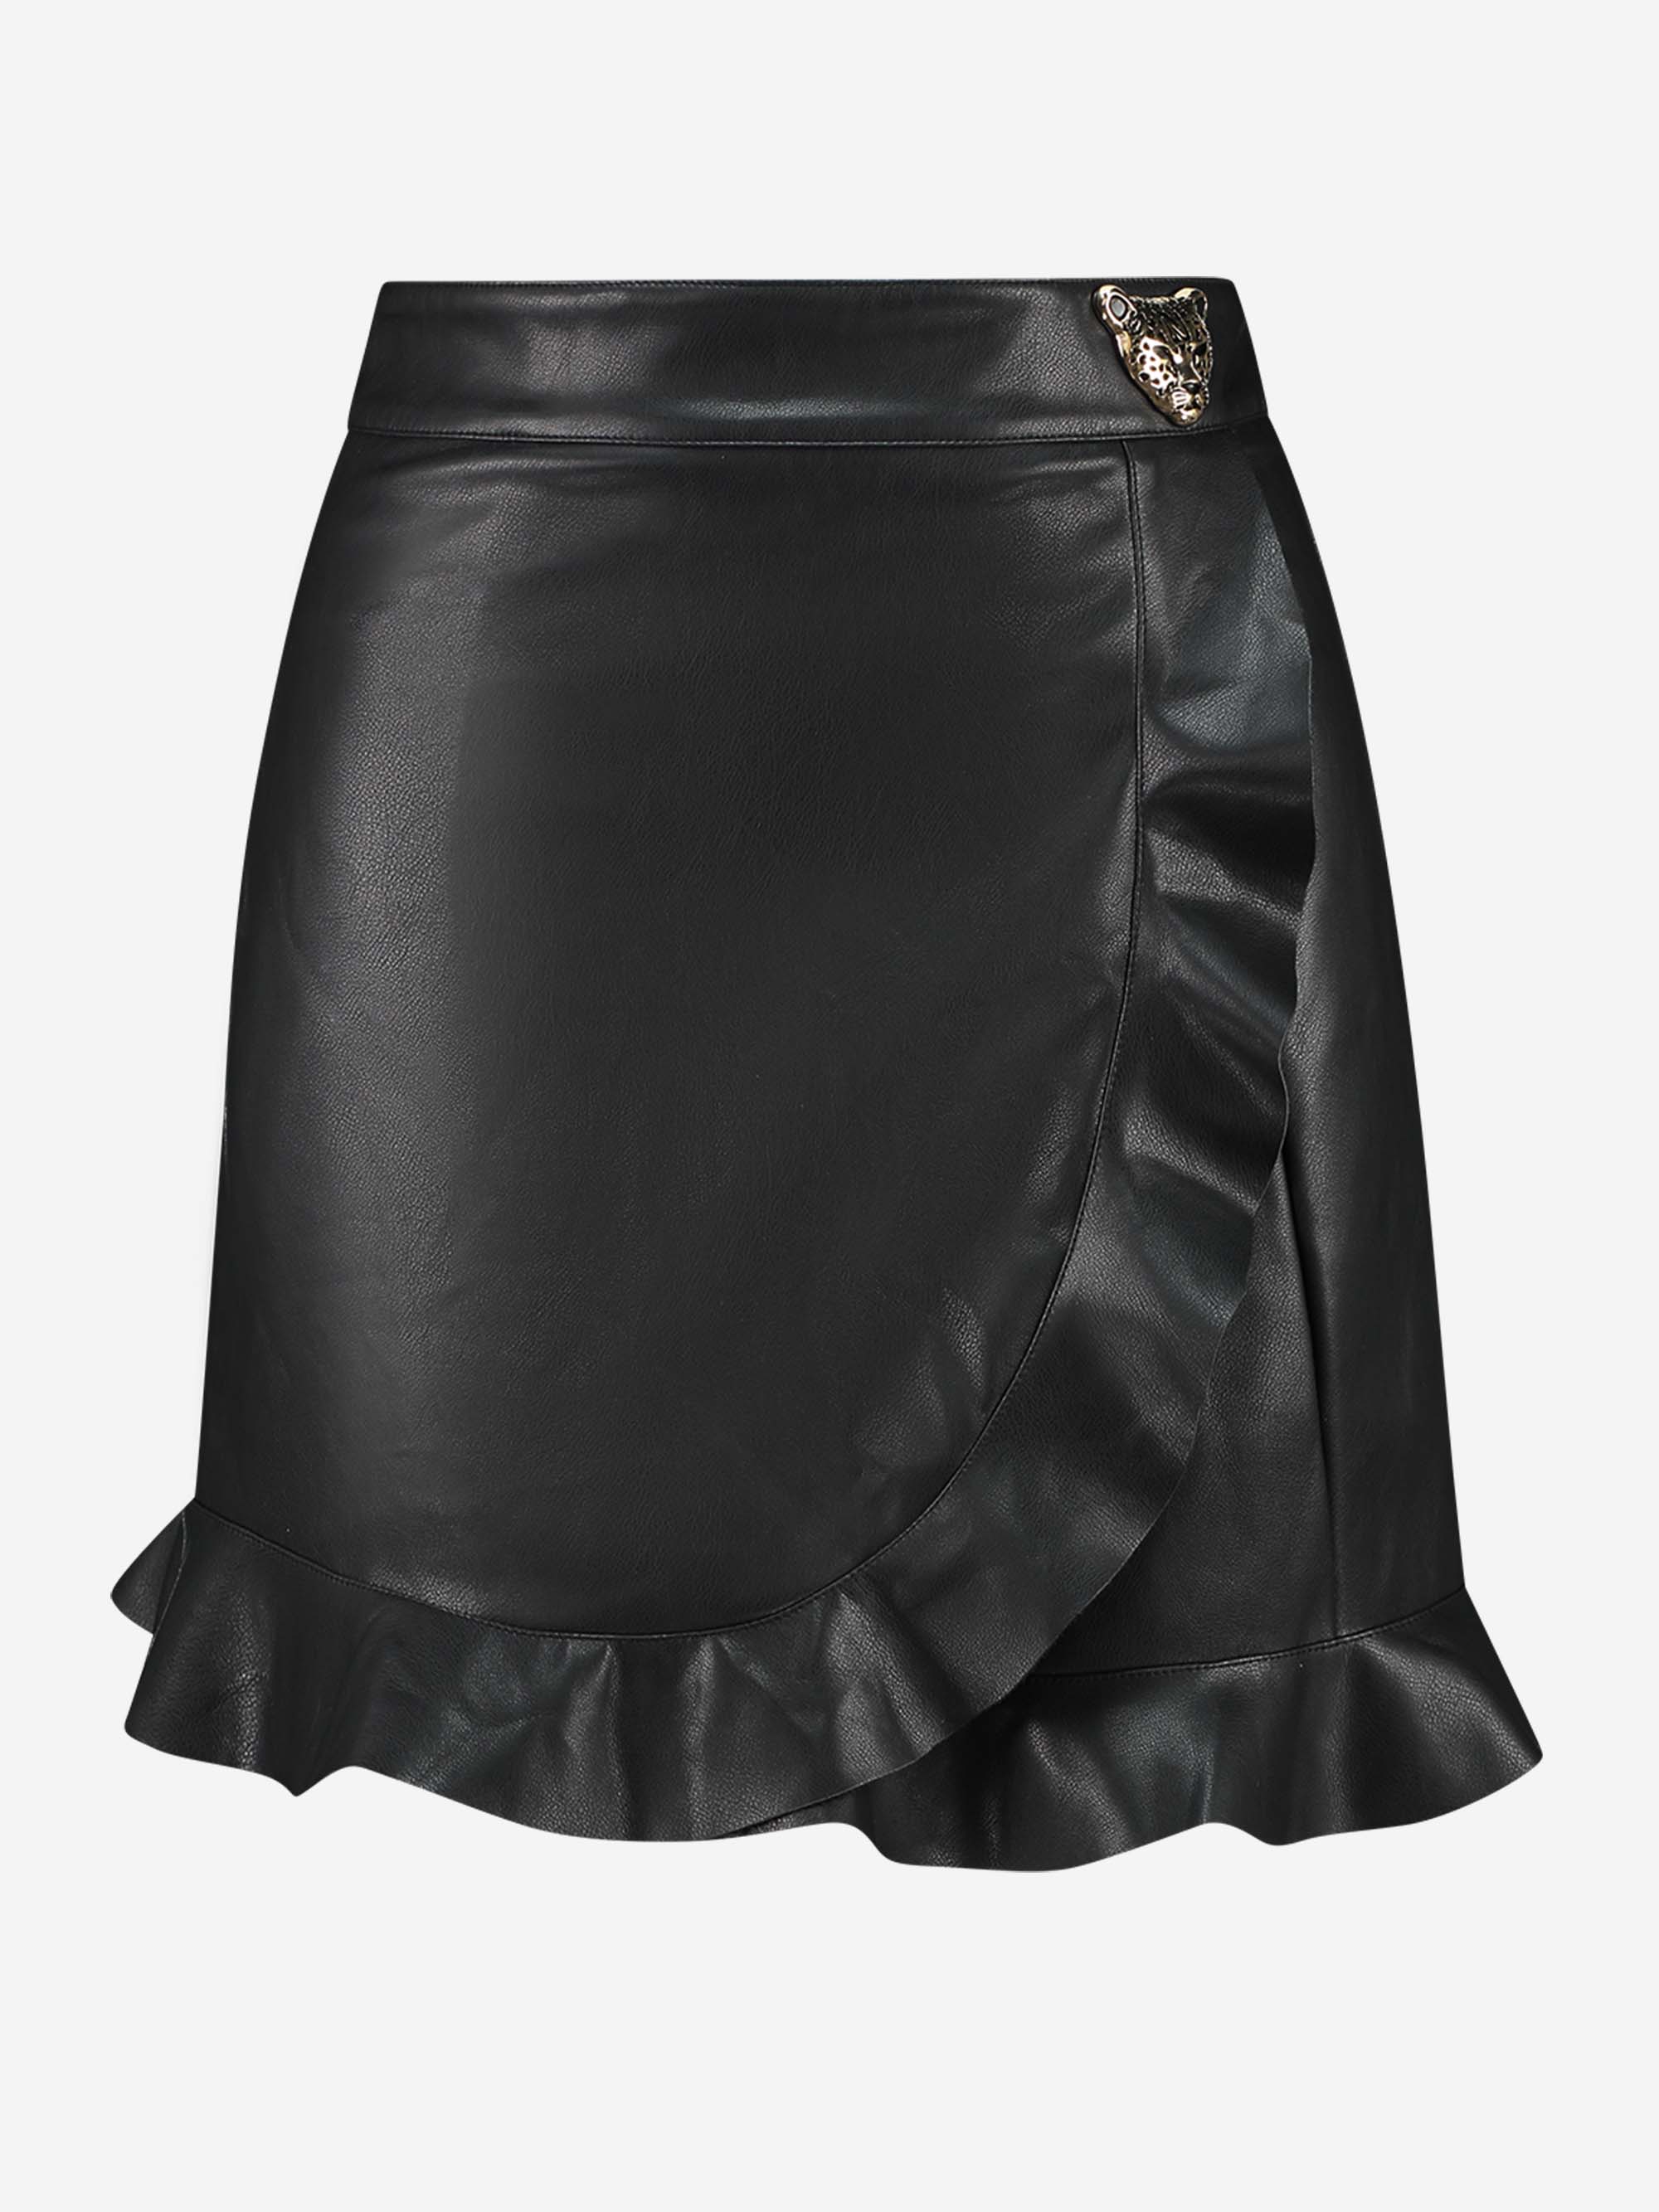 Vegan leather wrap skirt with leopard detail